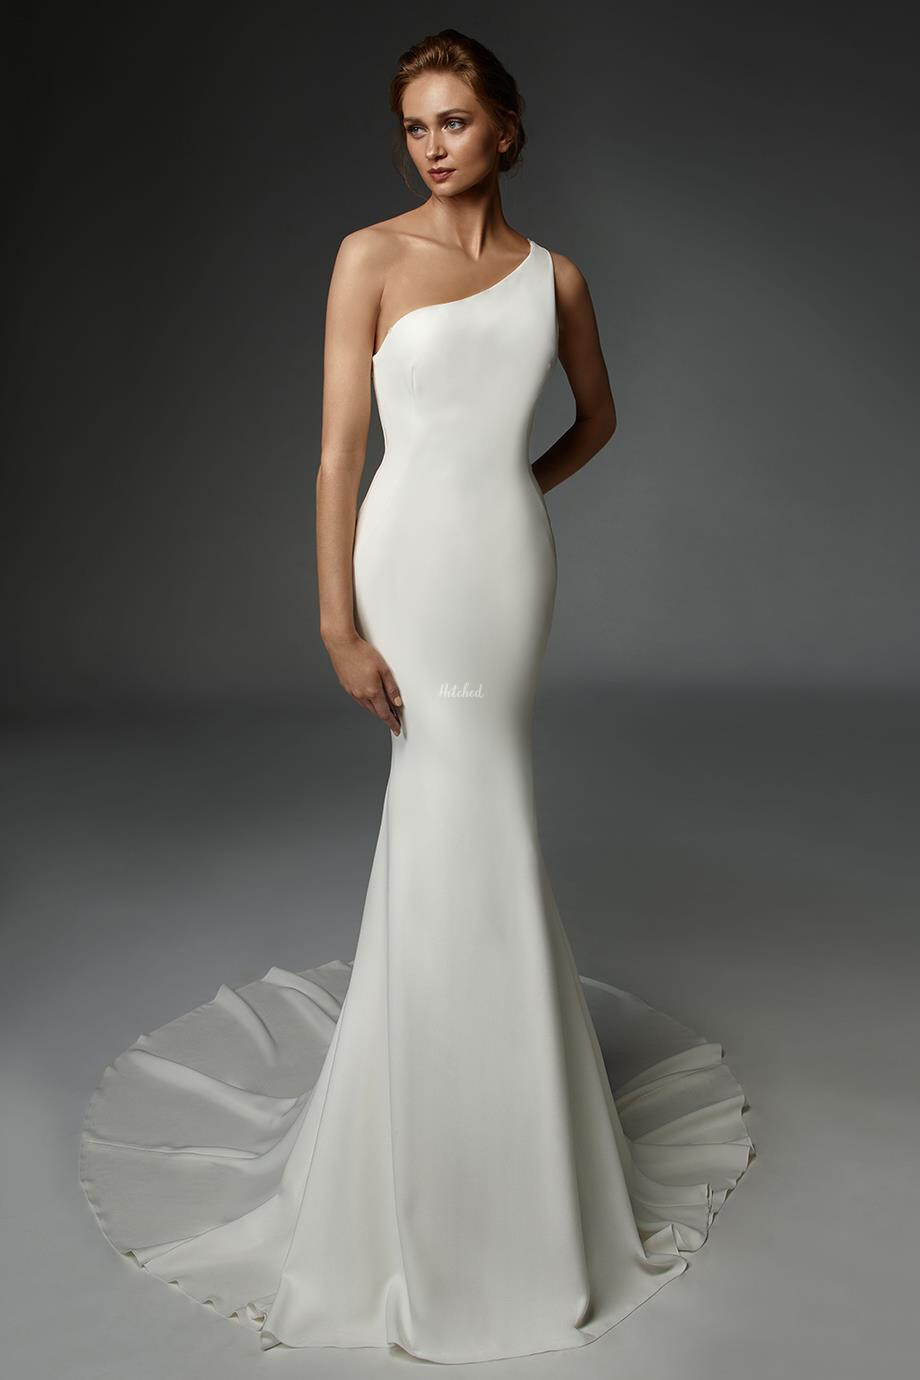 Victoire Wedding Dress from ELYSEE - hitched.co.uk